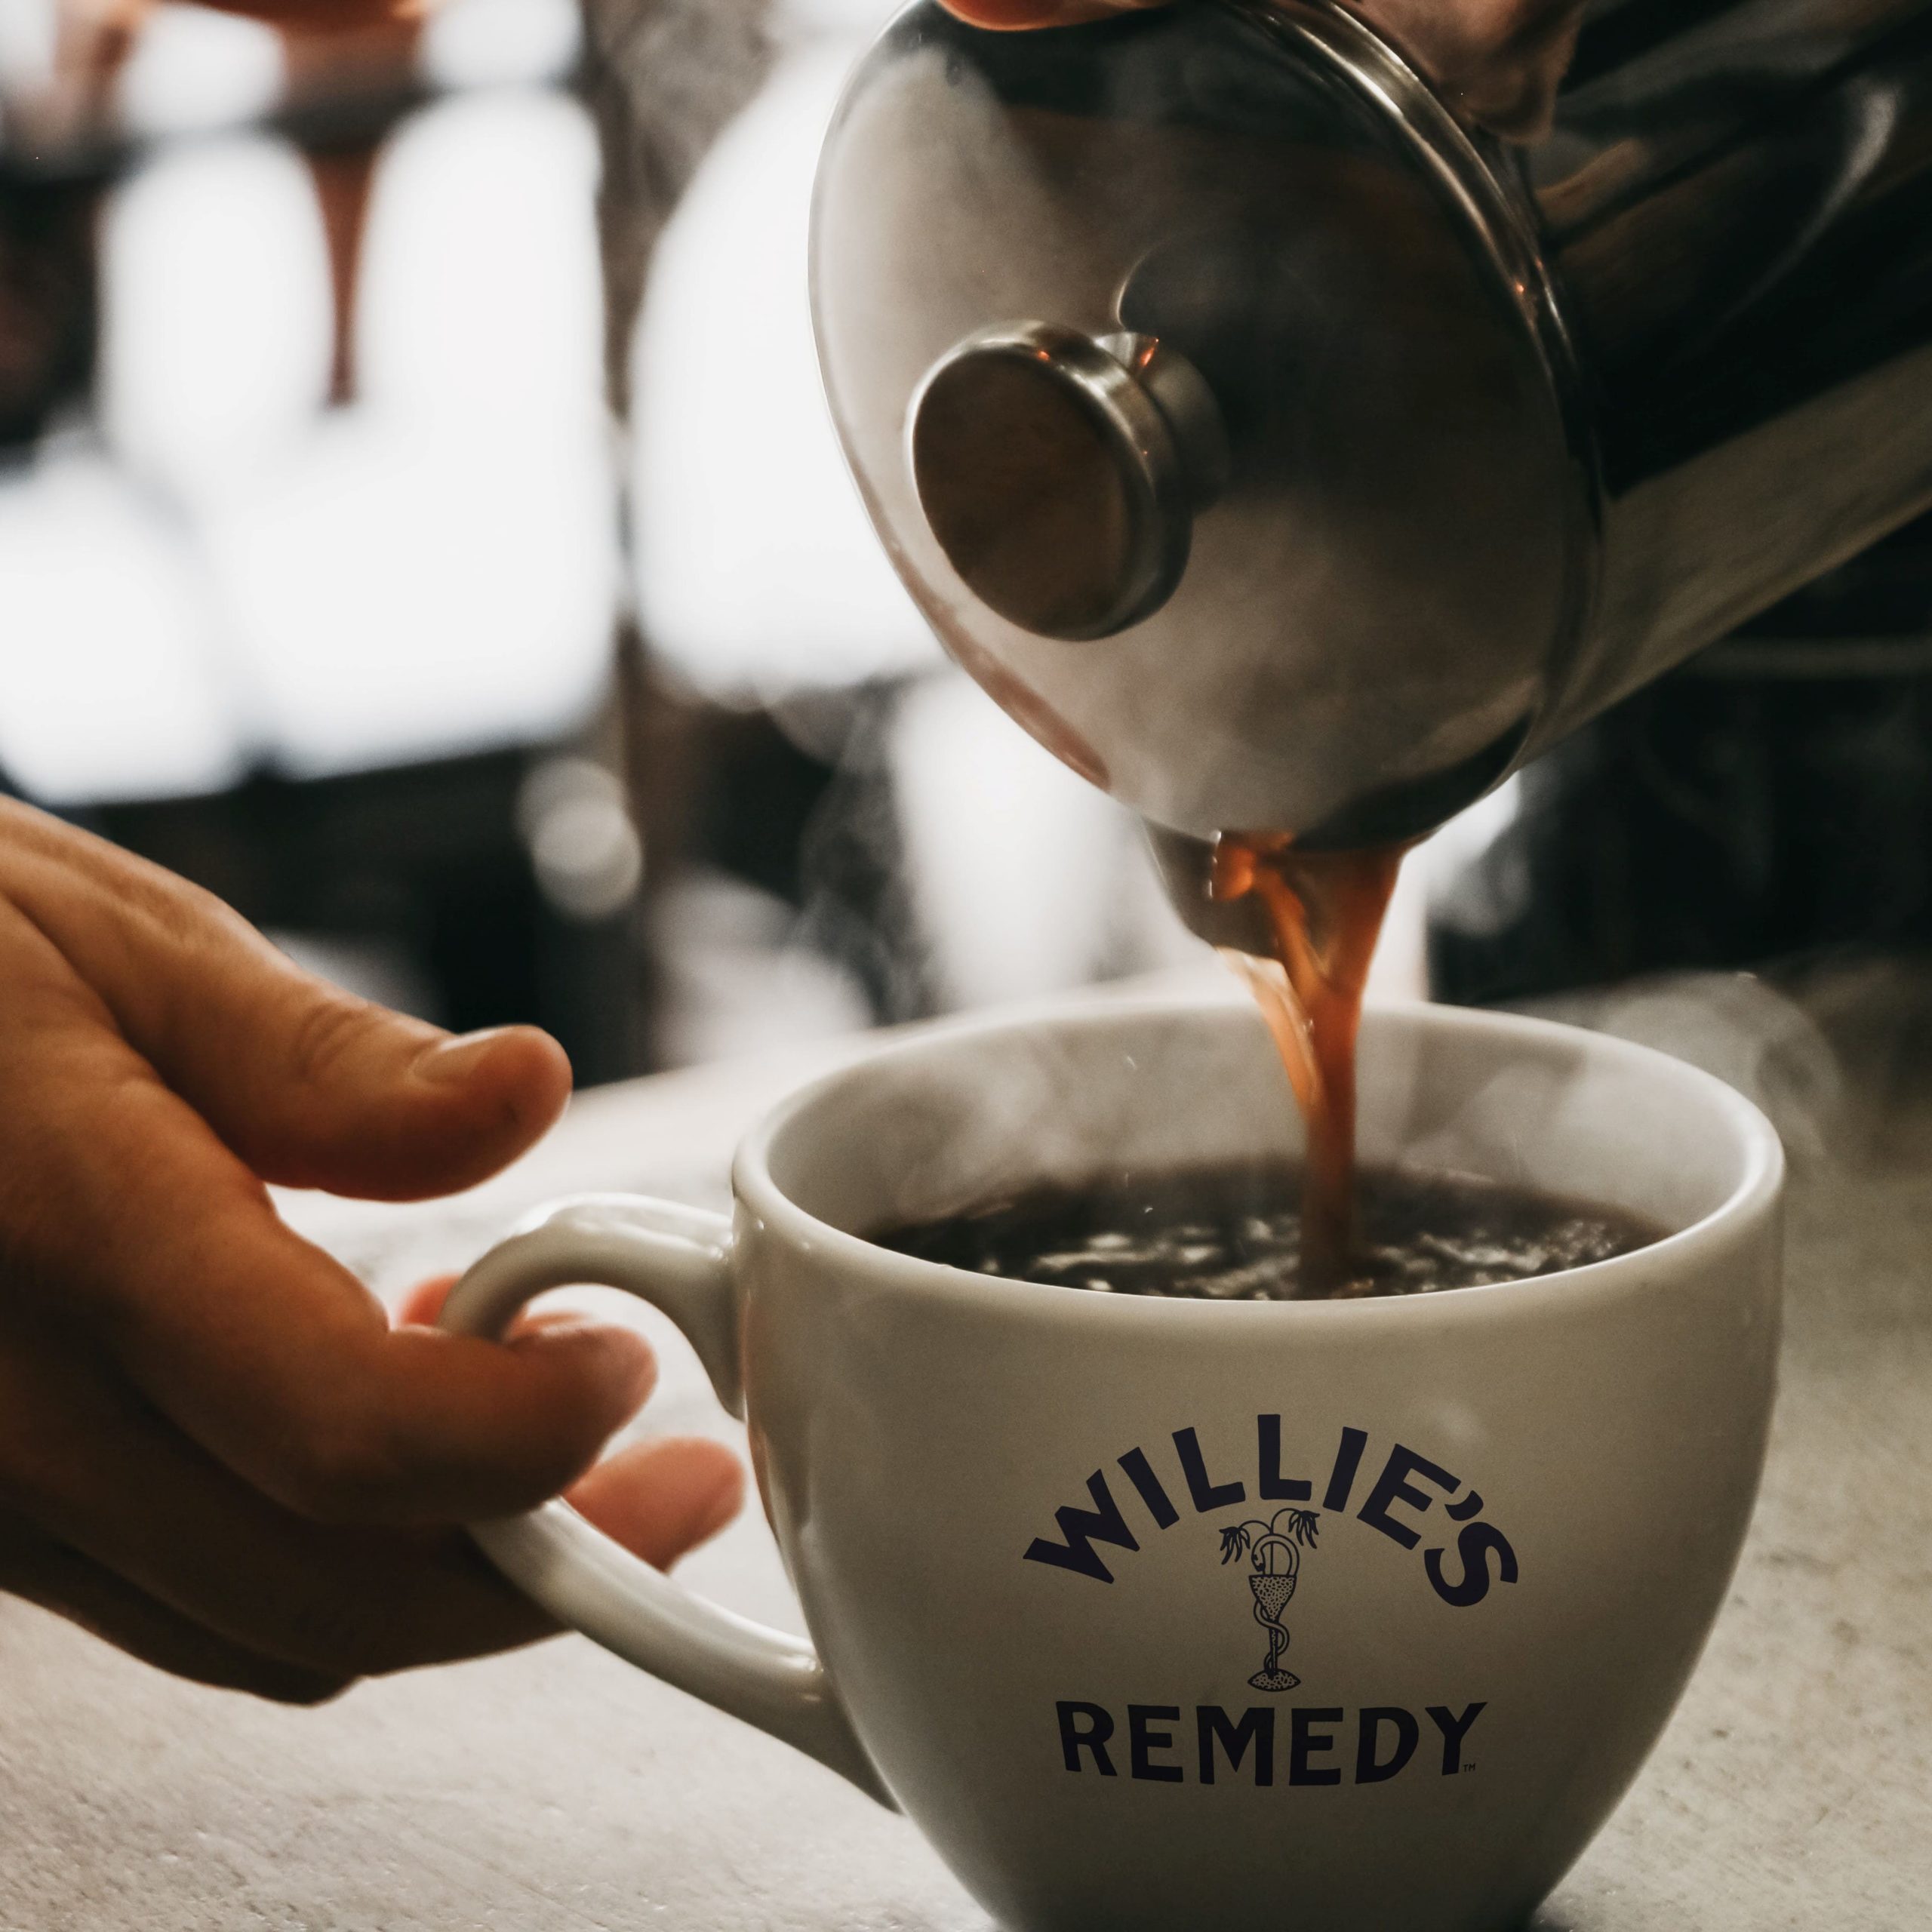 Steaming cup of Willie's Remedy CBD coffee being poured into mug from French Press